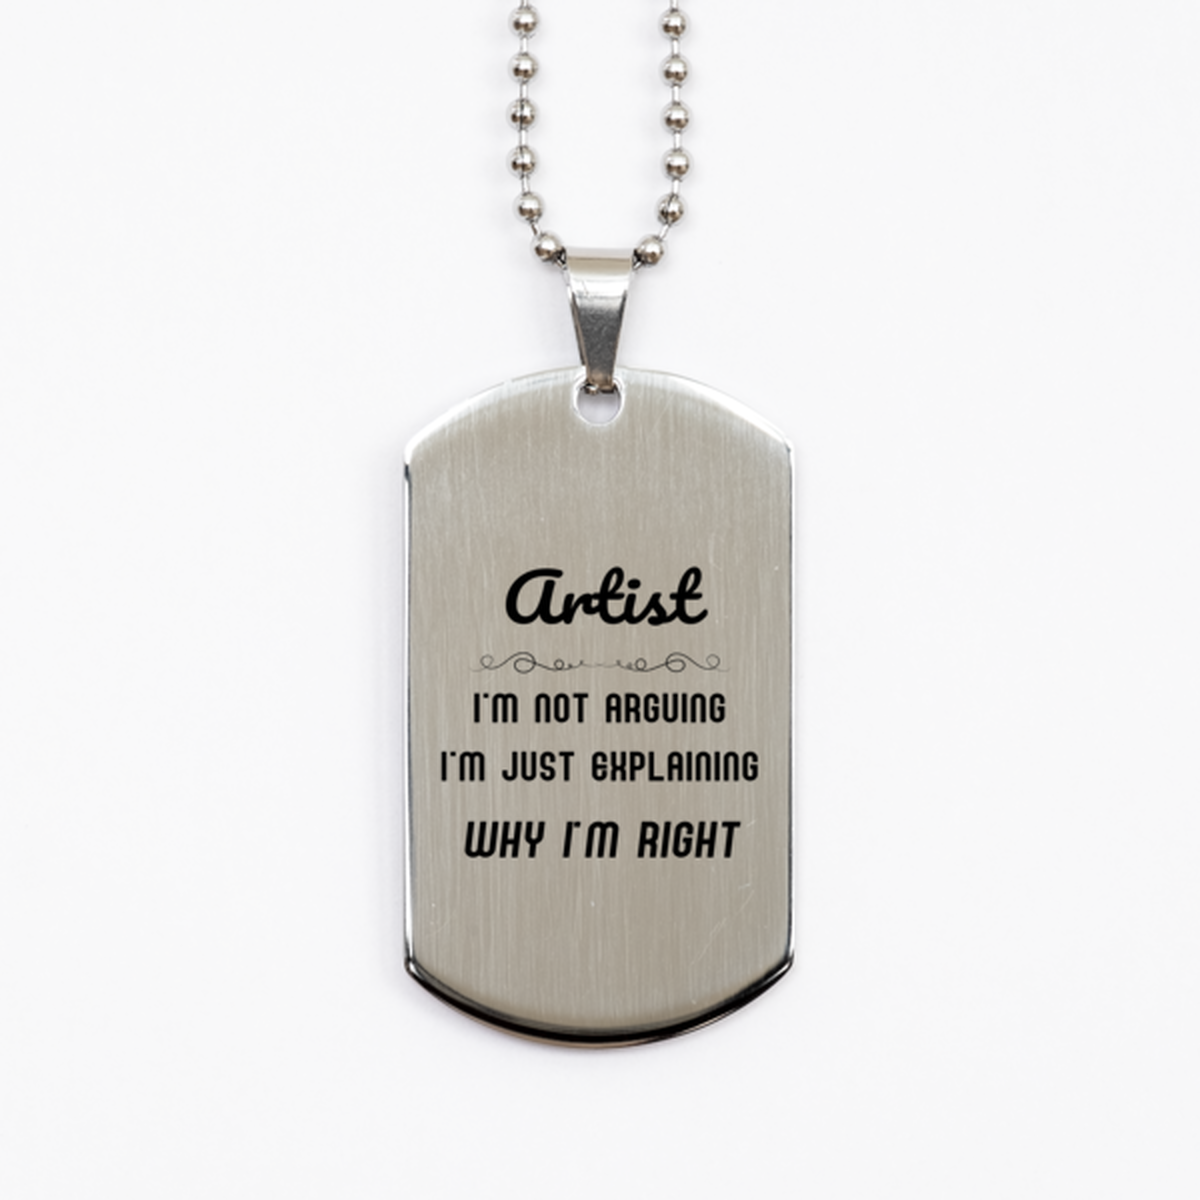 Artist I'm not Arguing. I'm Just Explaining Why I'm RIGHT Silver Dog Tag, Funny Saying Quote Artist Gifts For Artist Graduation Birthday Christmas Gifts for Men Women Coworker